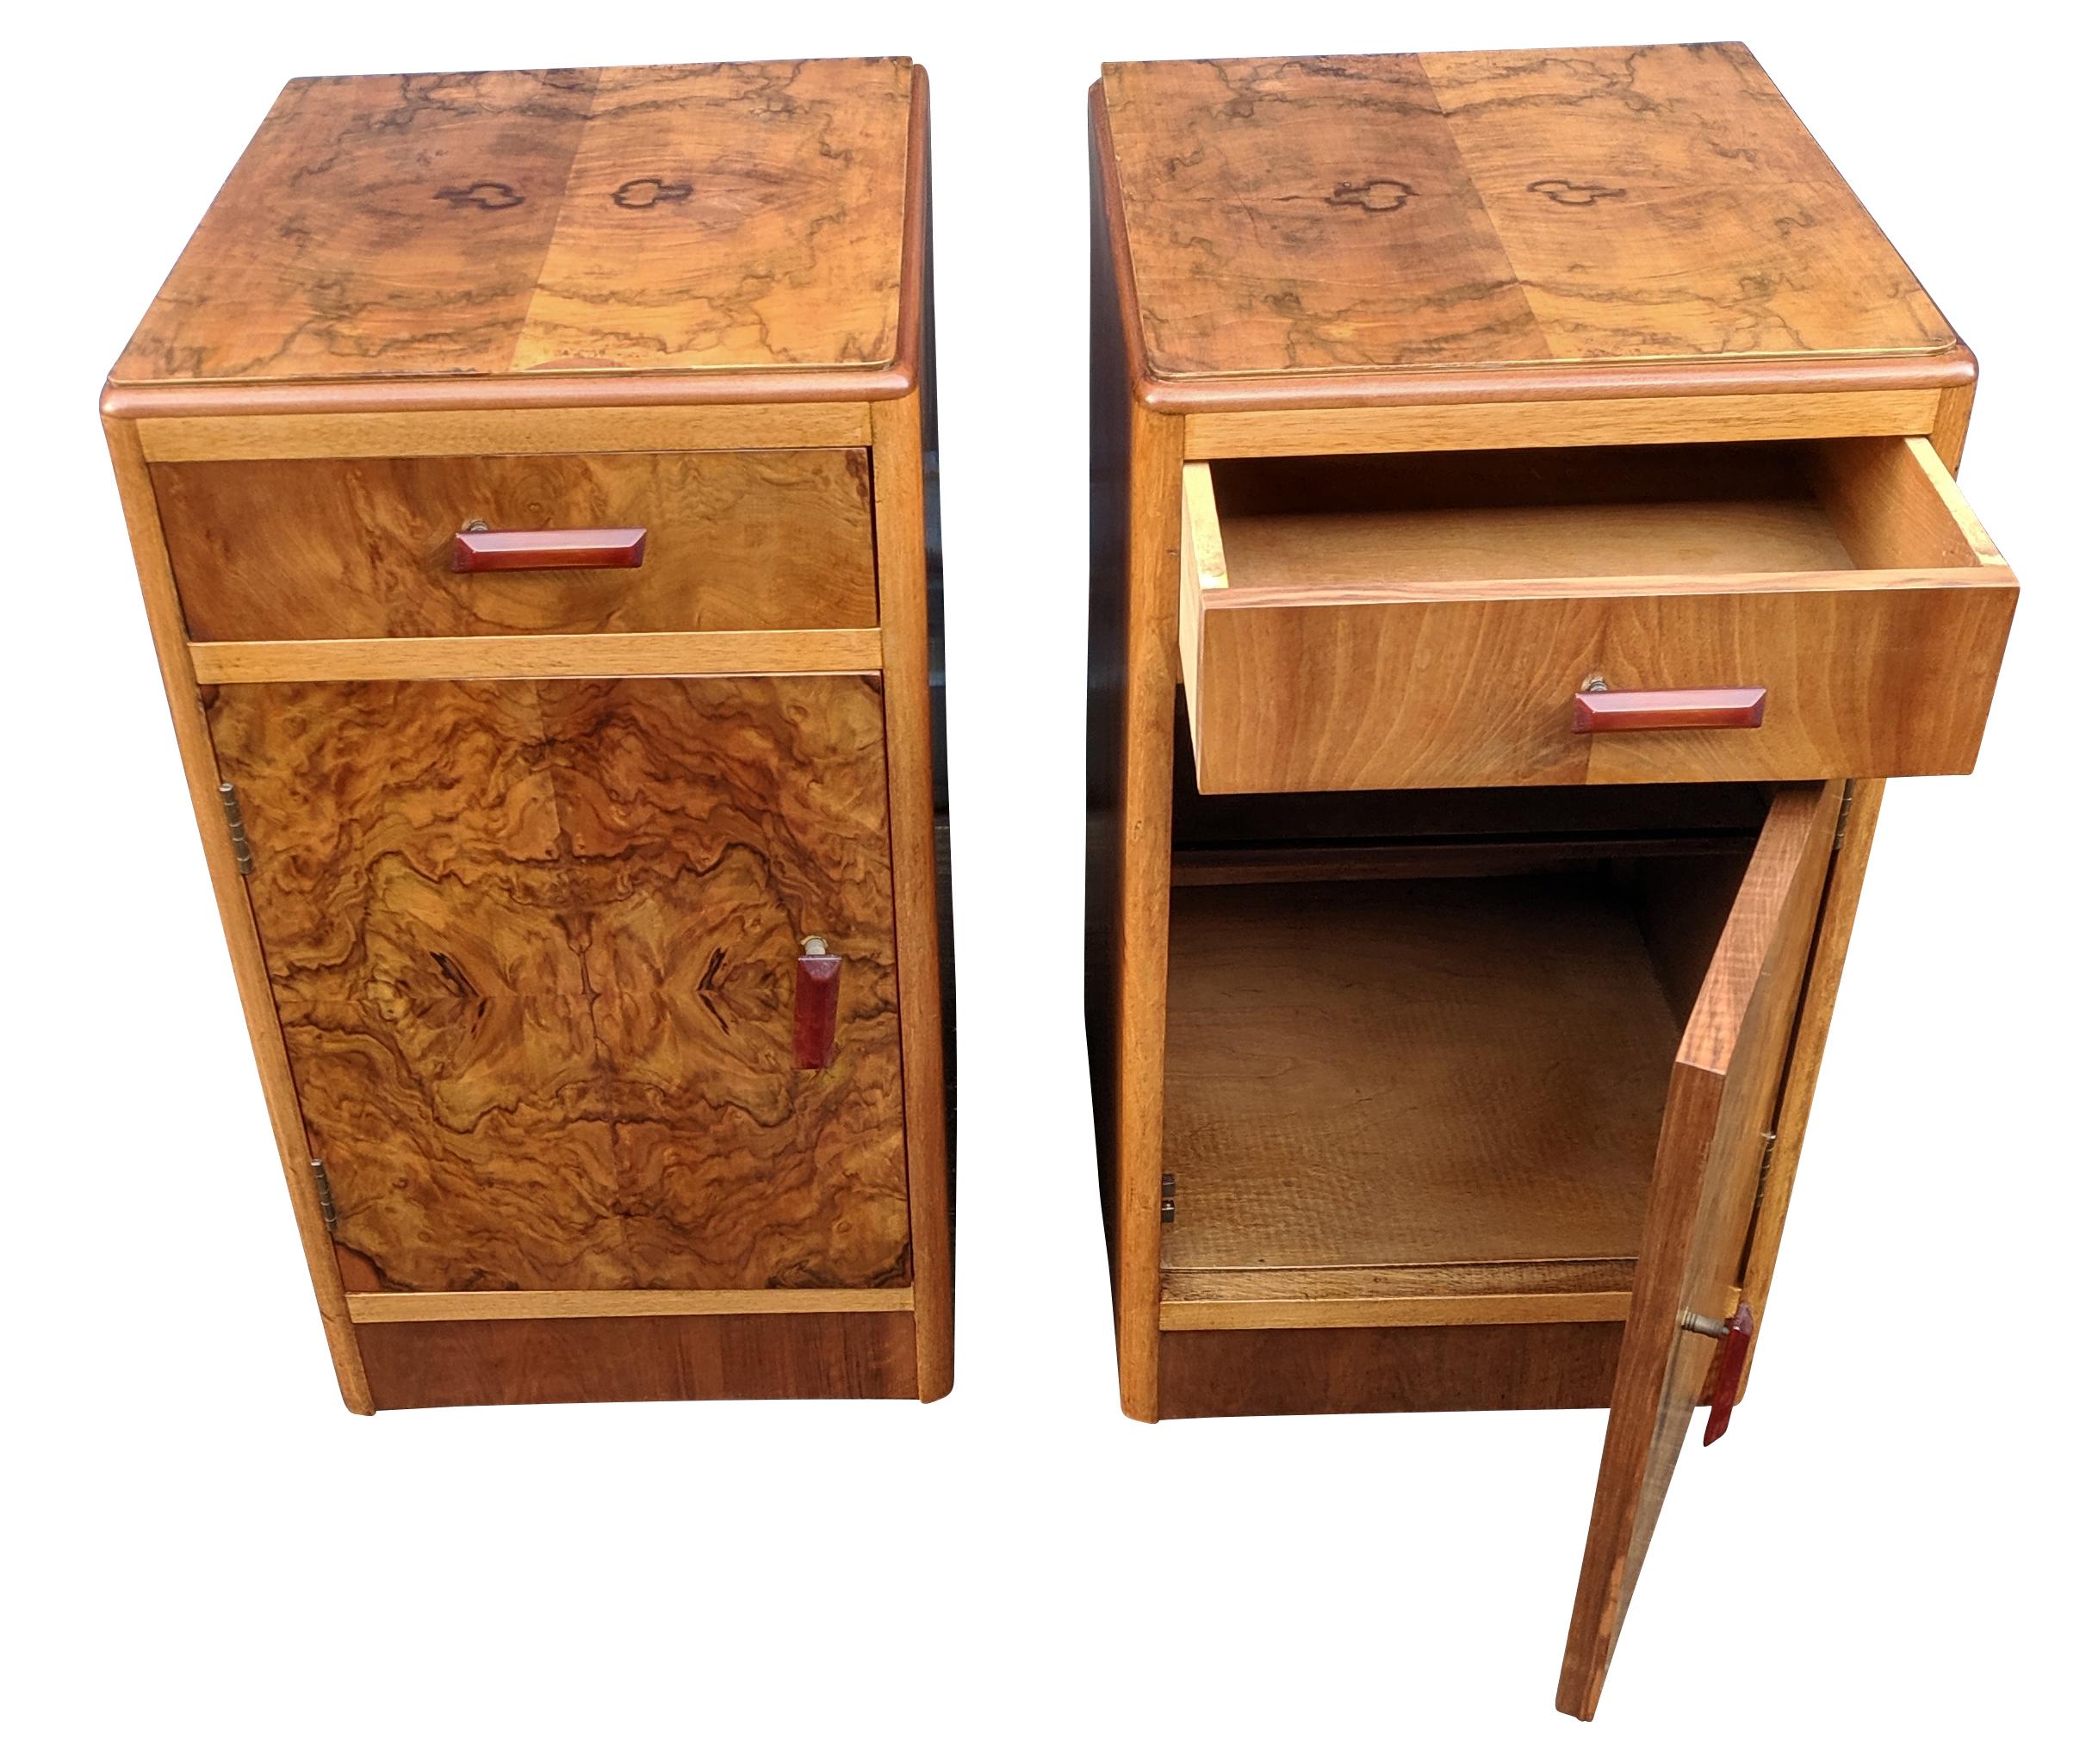 Fabulous pair of matching 1930s Art Deco bedside tables in heavily figured walnut veneer and original red bakelite phenolic handles. Two generously sized internal storage areas. Each cabinet has a pull out / pull-out upper drawer which works